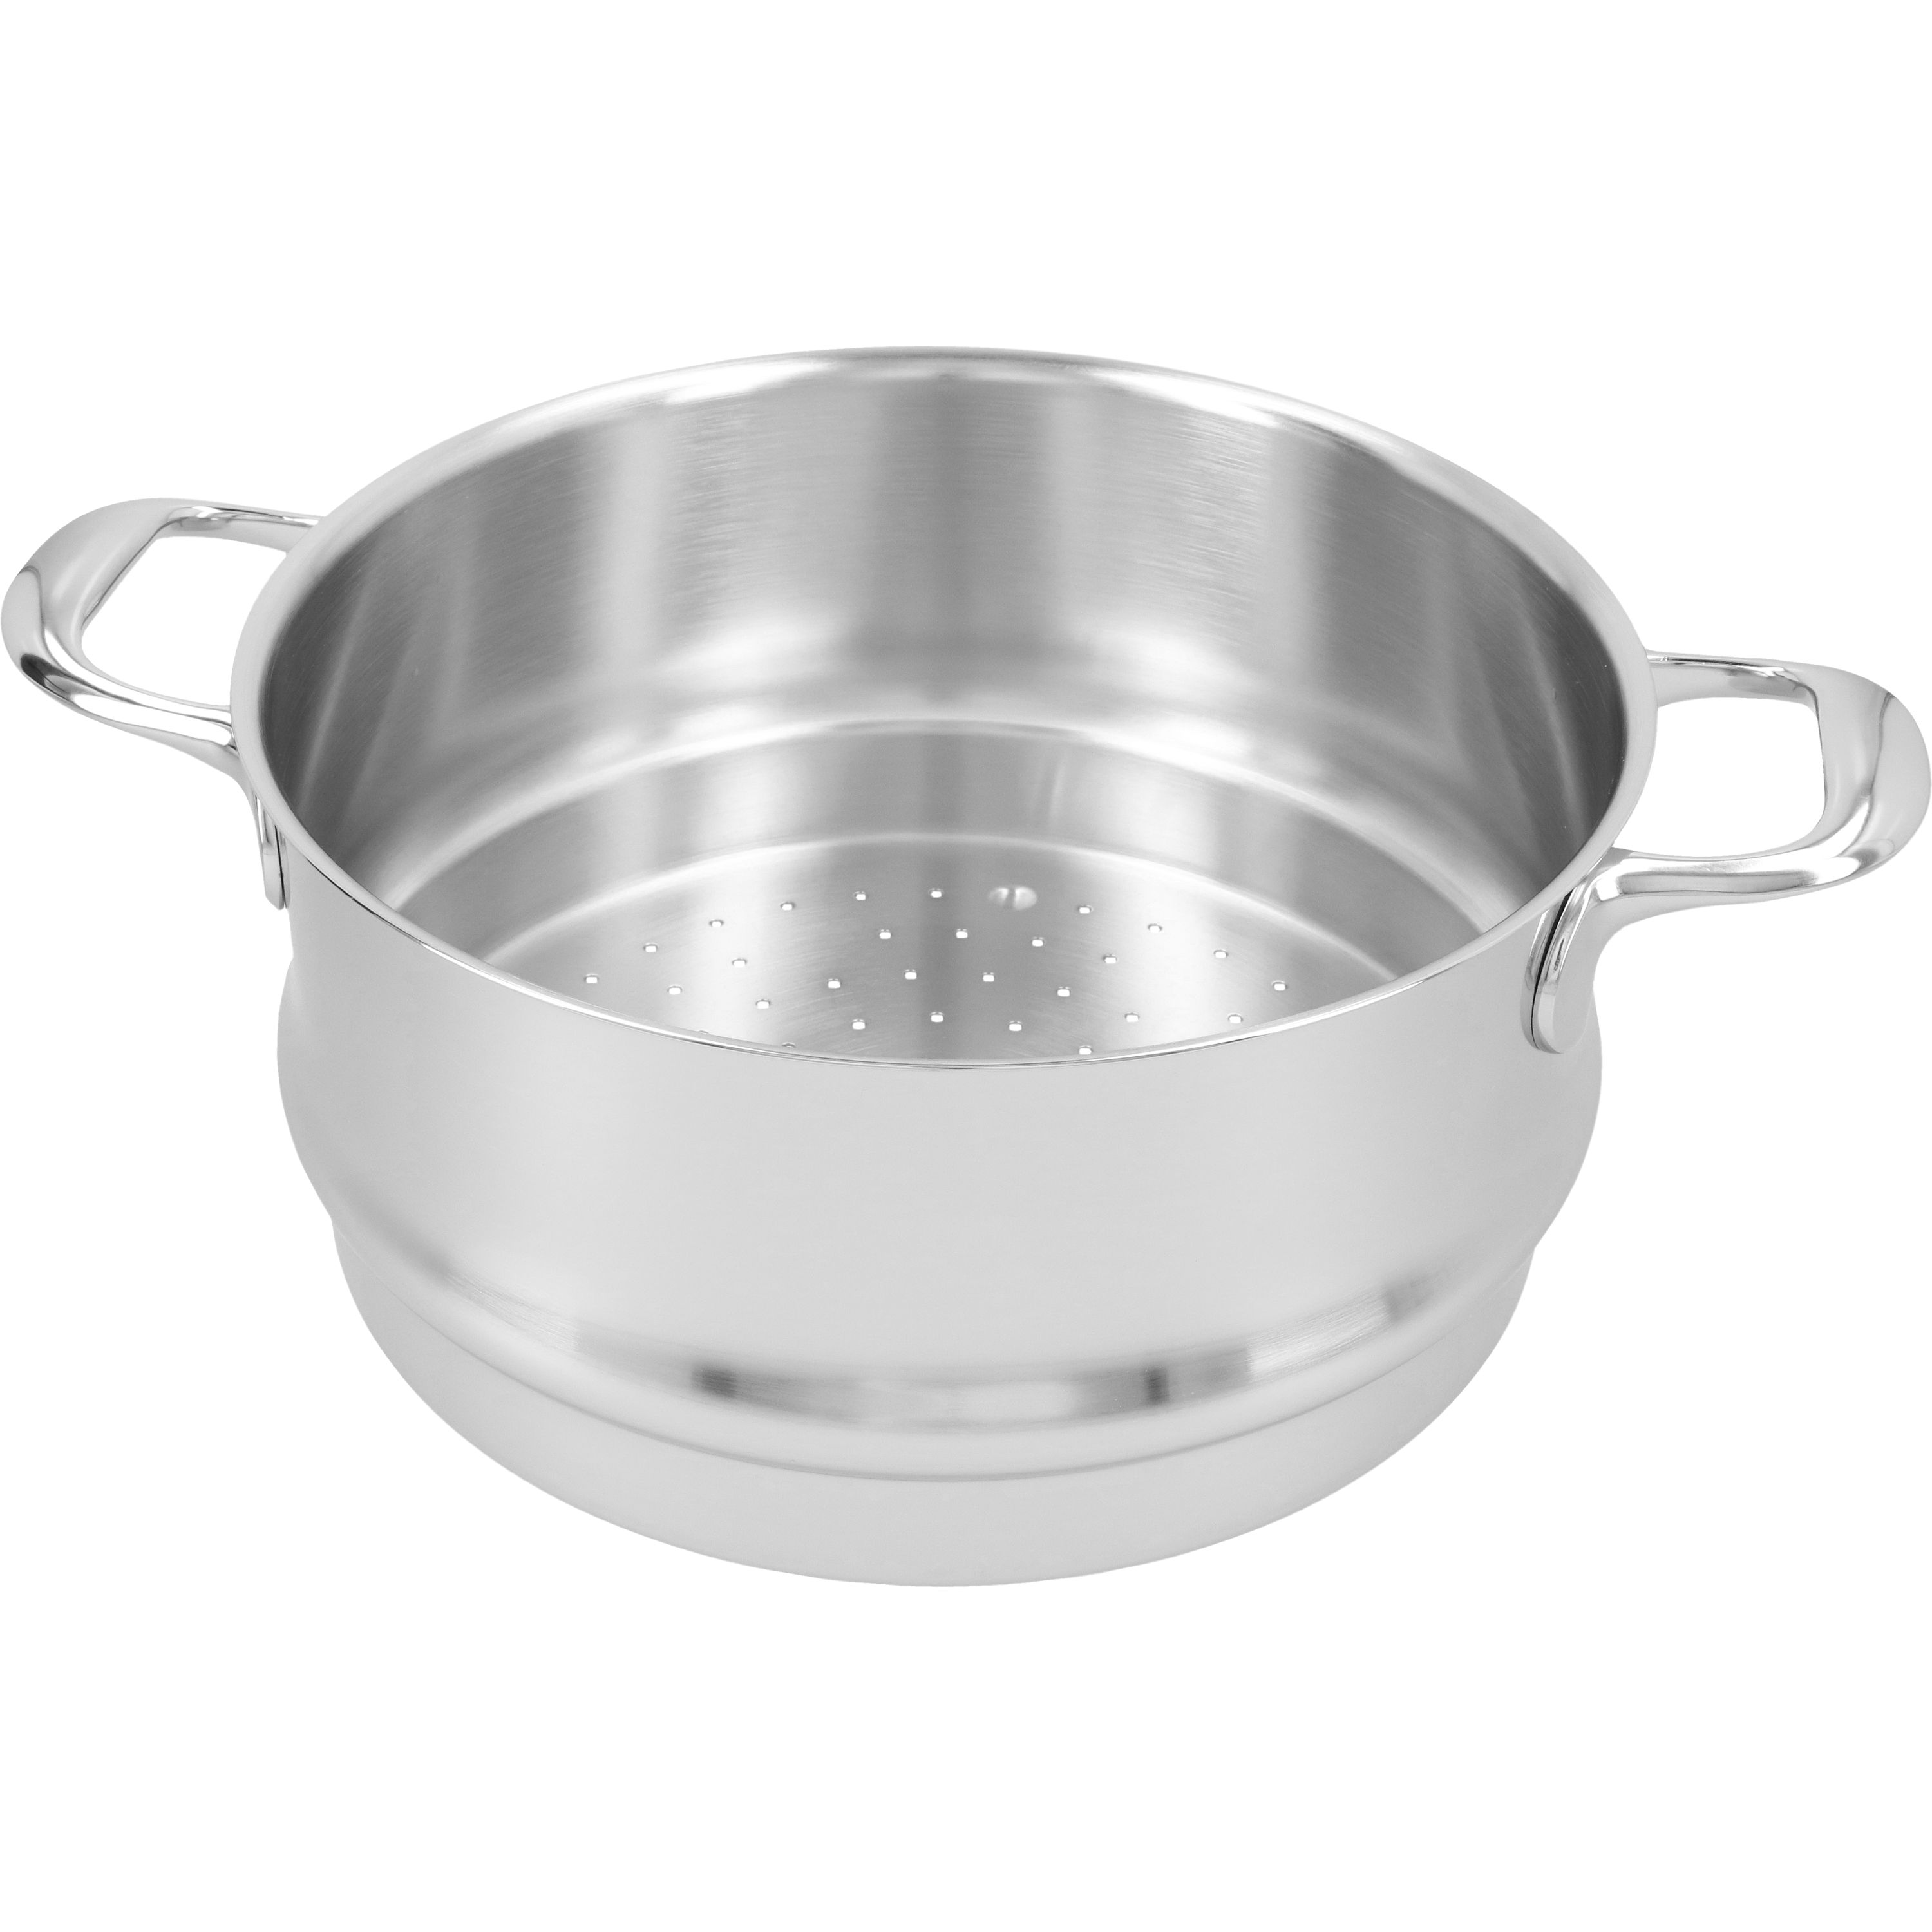 Good Cook Touch Stainless Steel Steamer Basket - Shop Utensils & Gadgets at  H-E-B